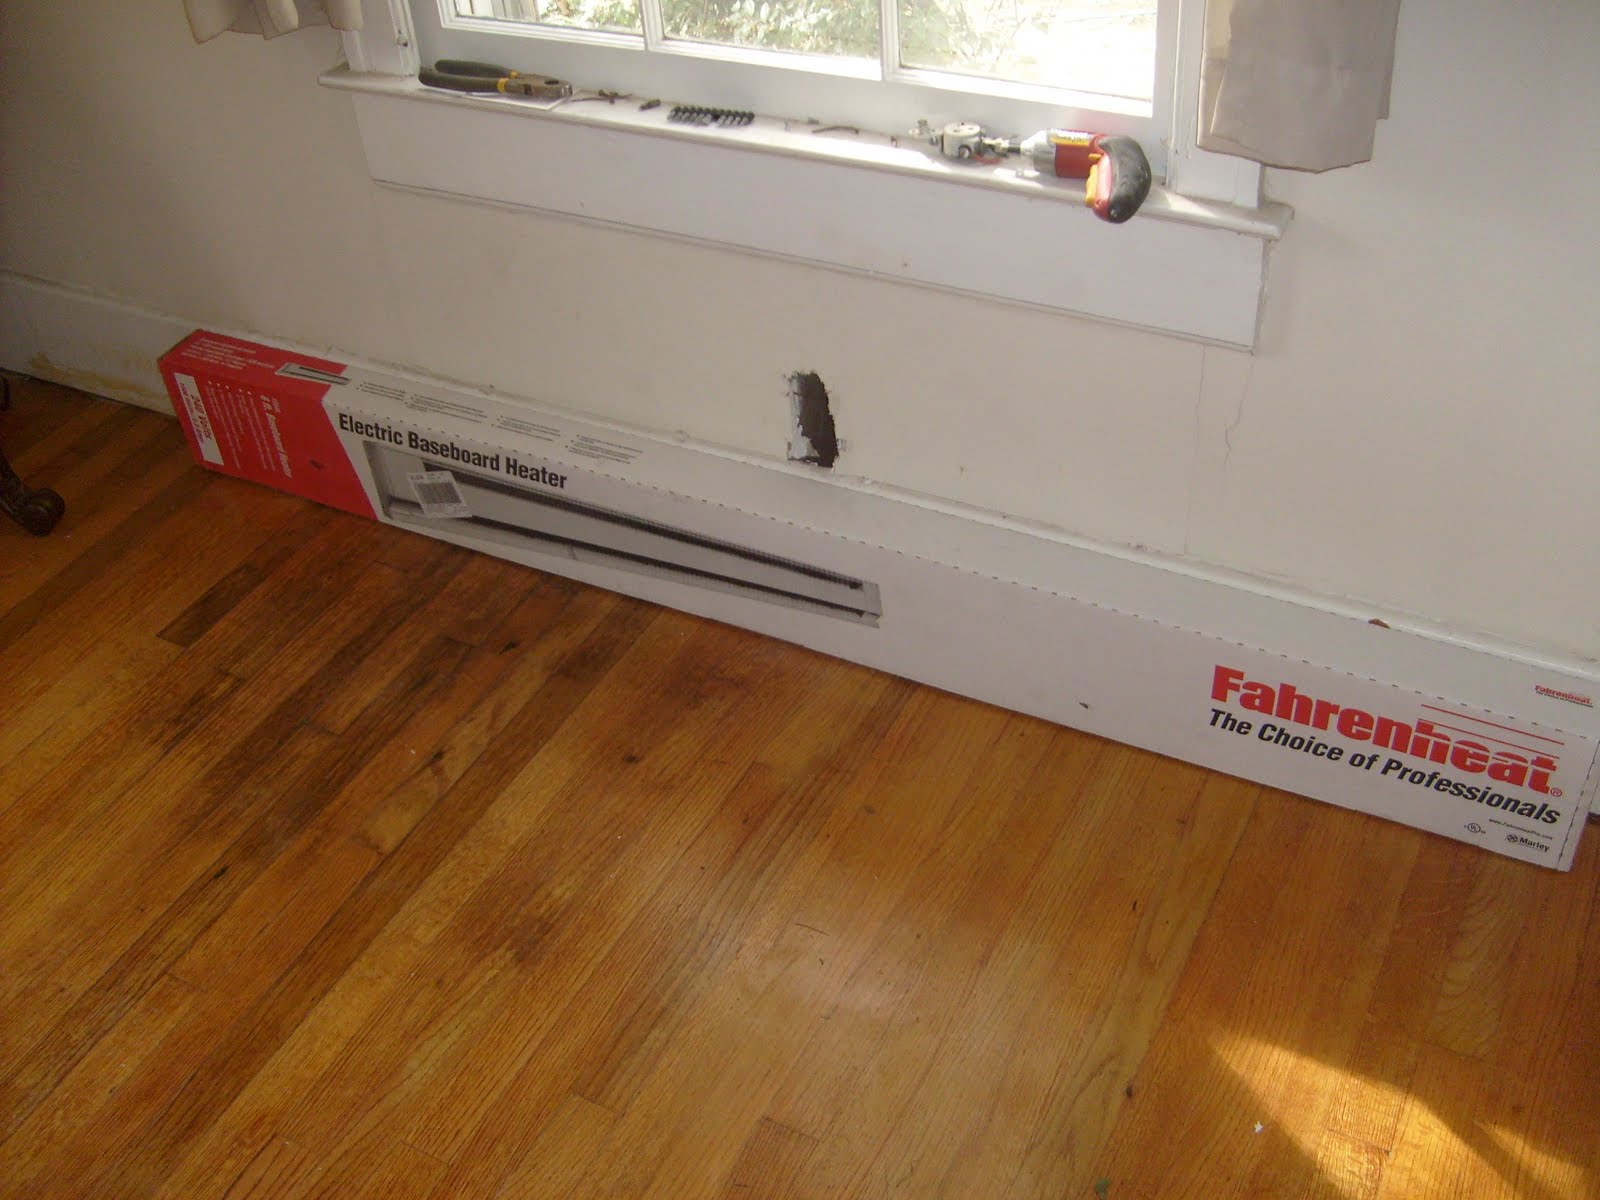 How do you wire an electric baseboard heater?